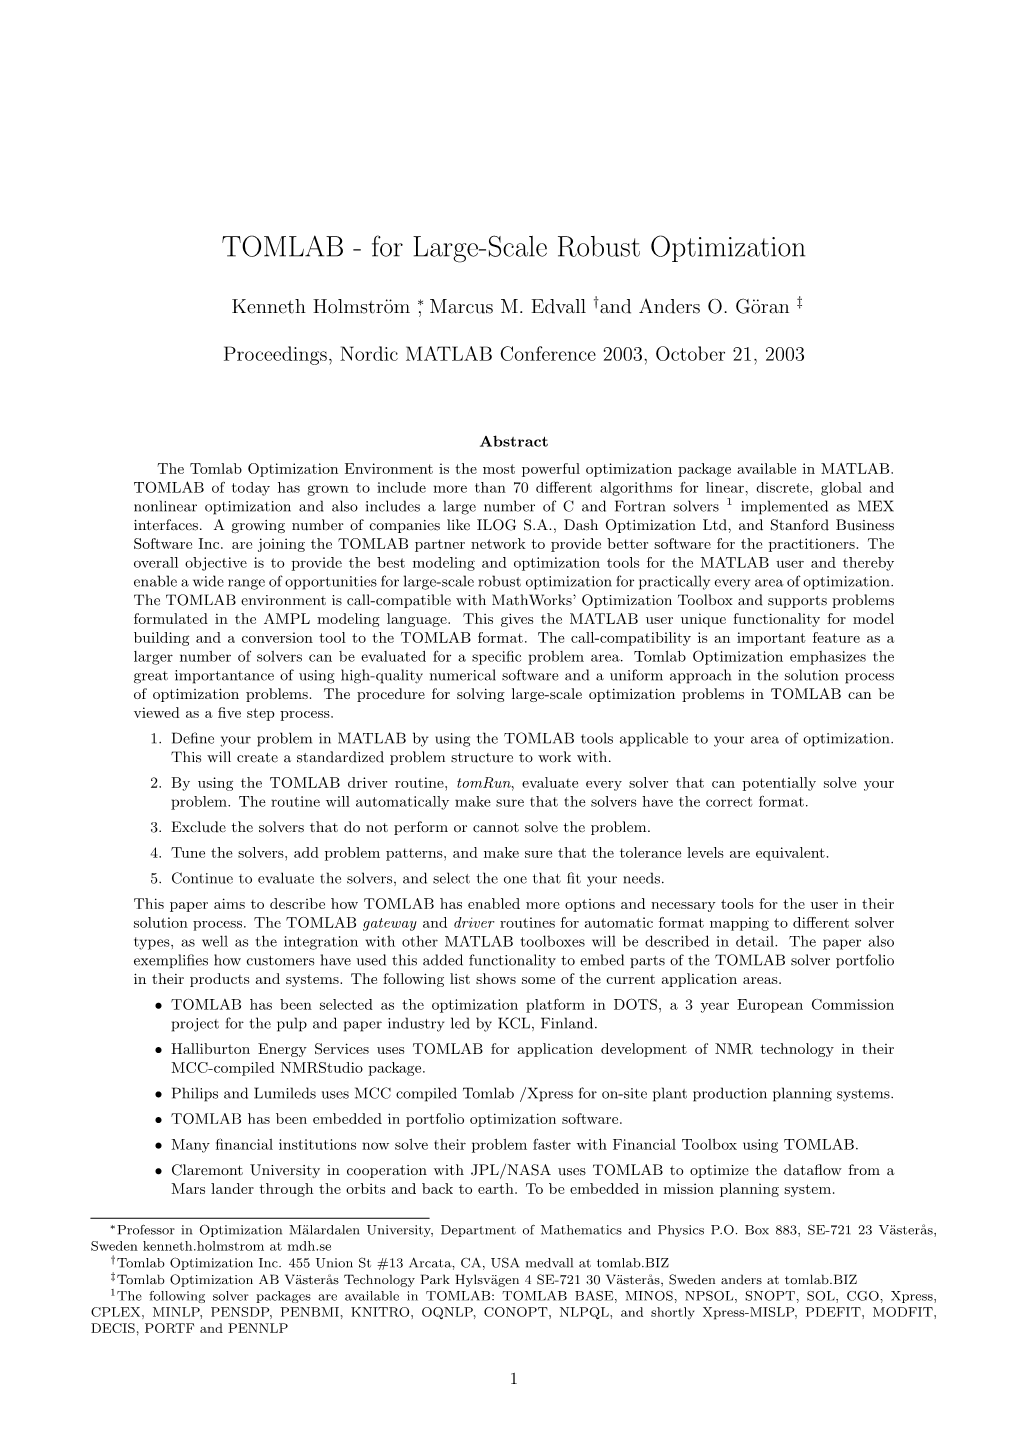 TOMLAB - for Large-Scale Robust Optimization